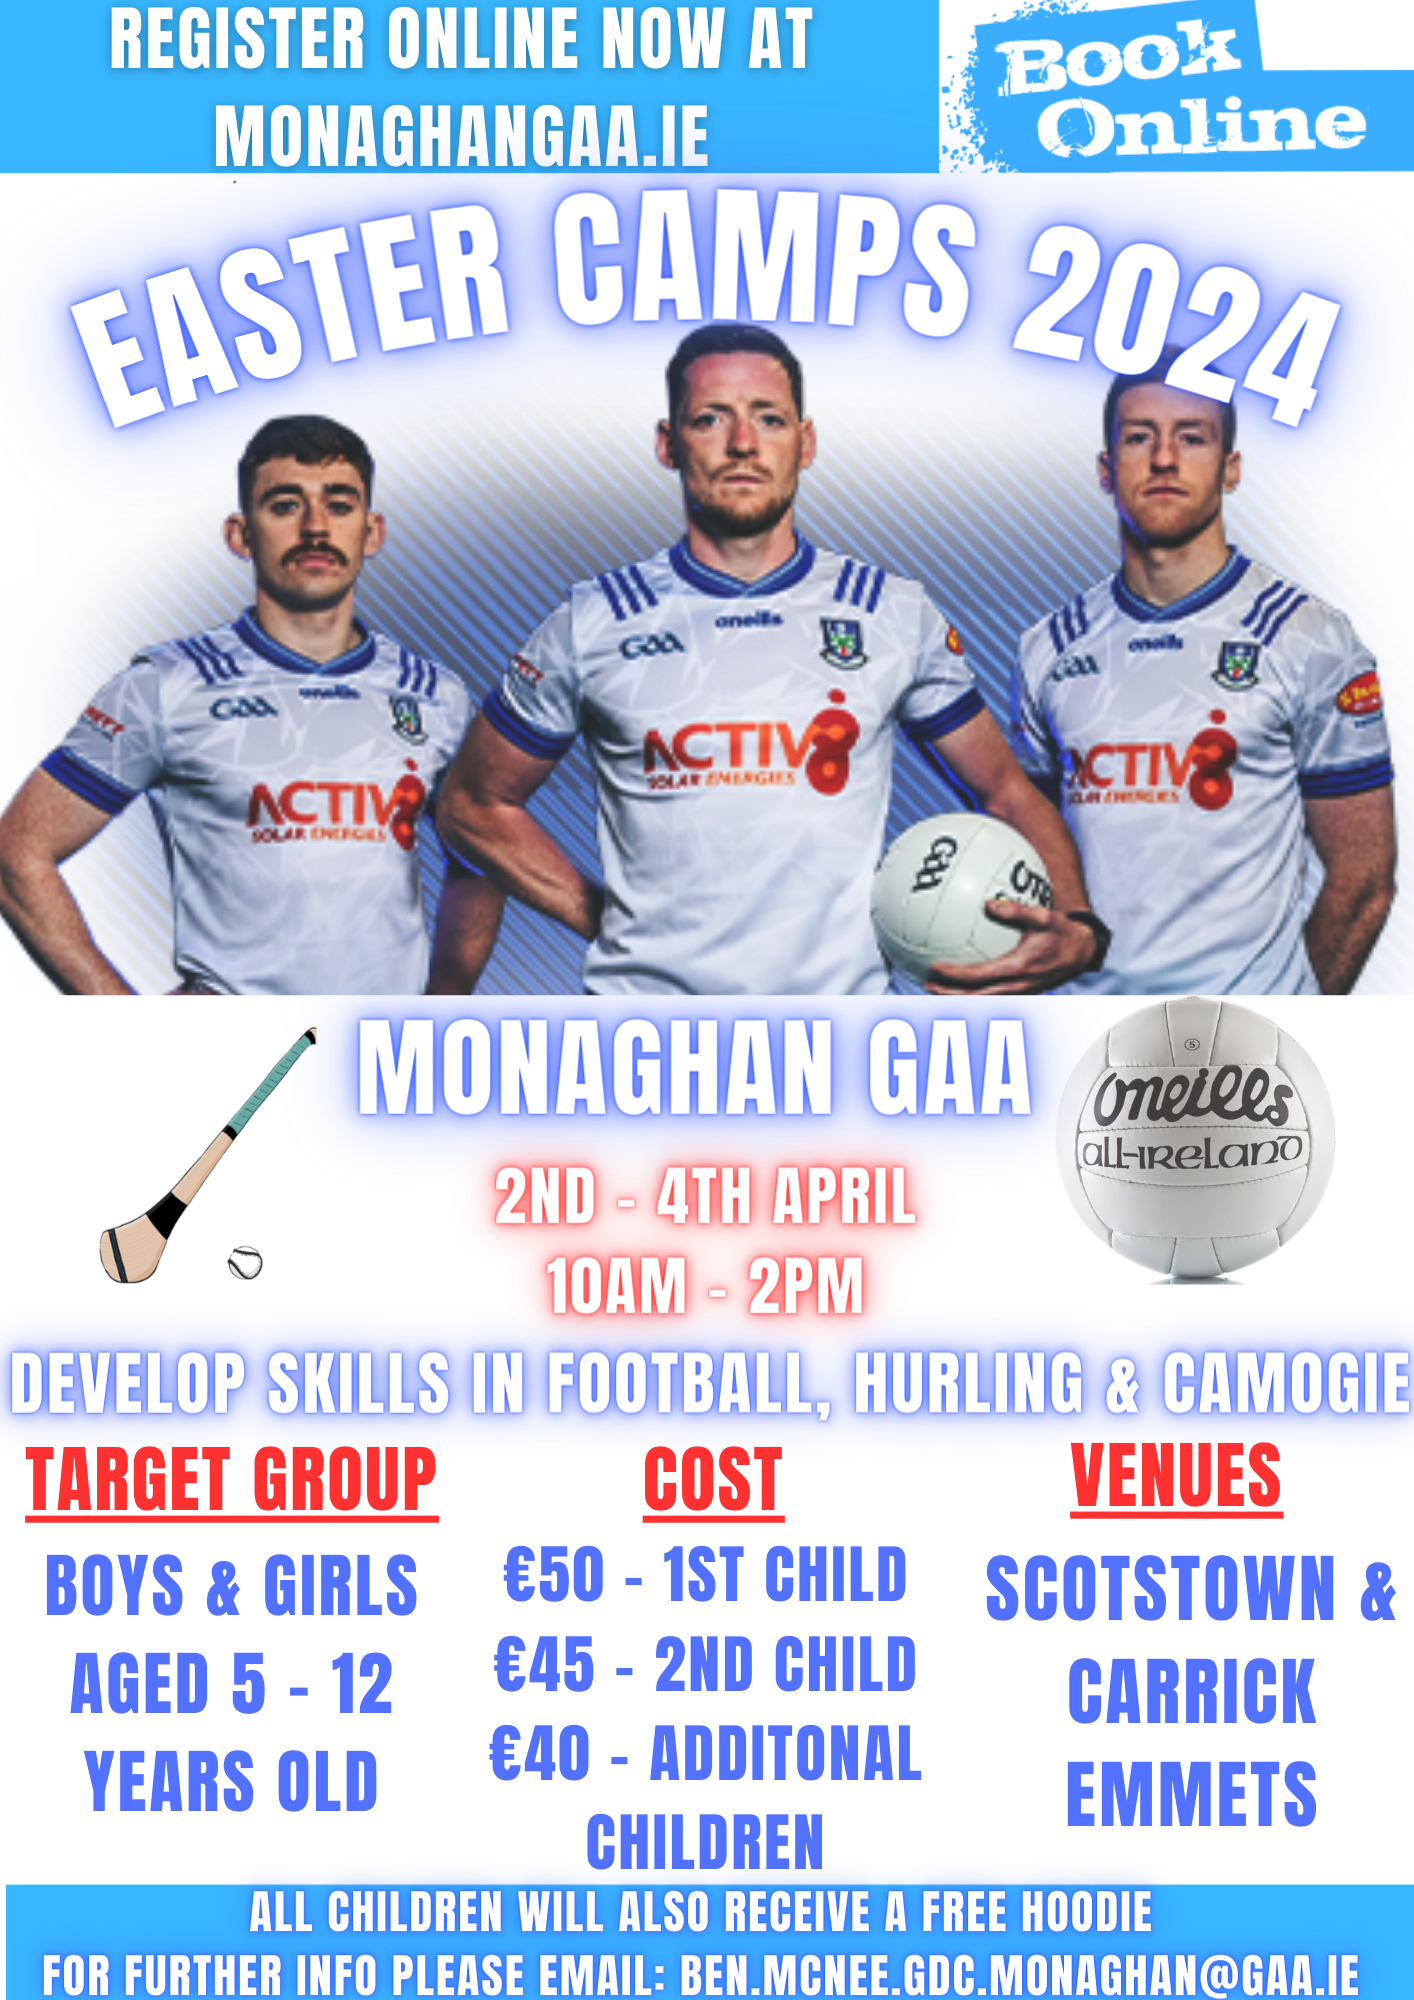 Easter Camps 2024 – Monaghan GAA are delighted to announce the return of our Easter Camps for 2024.